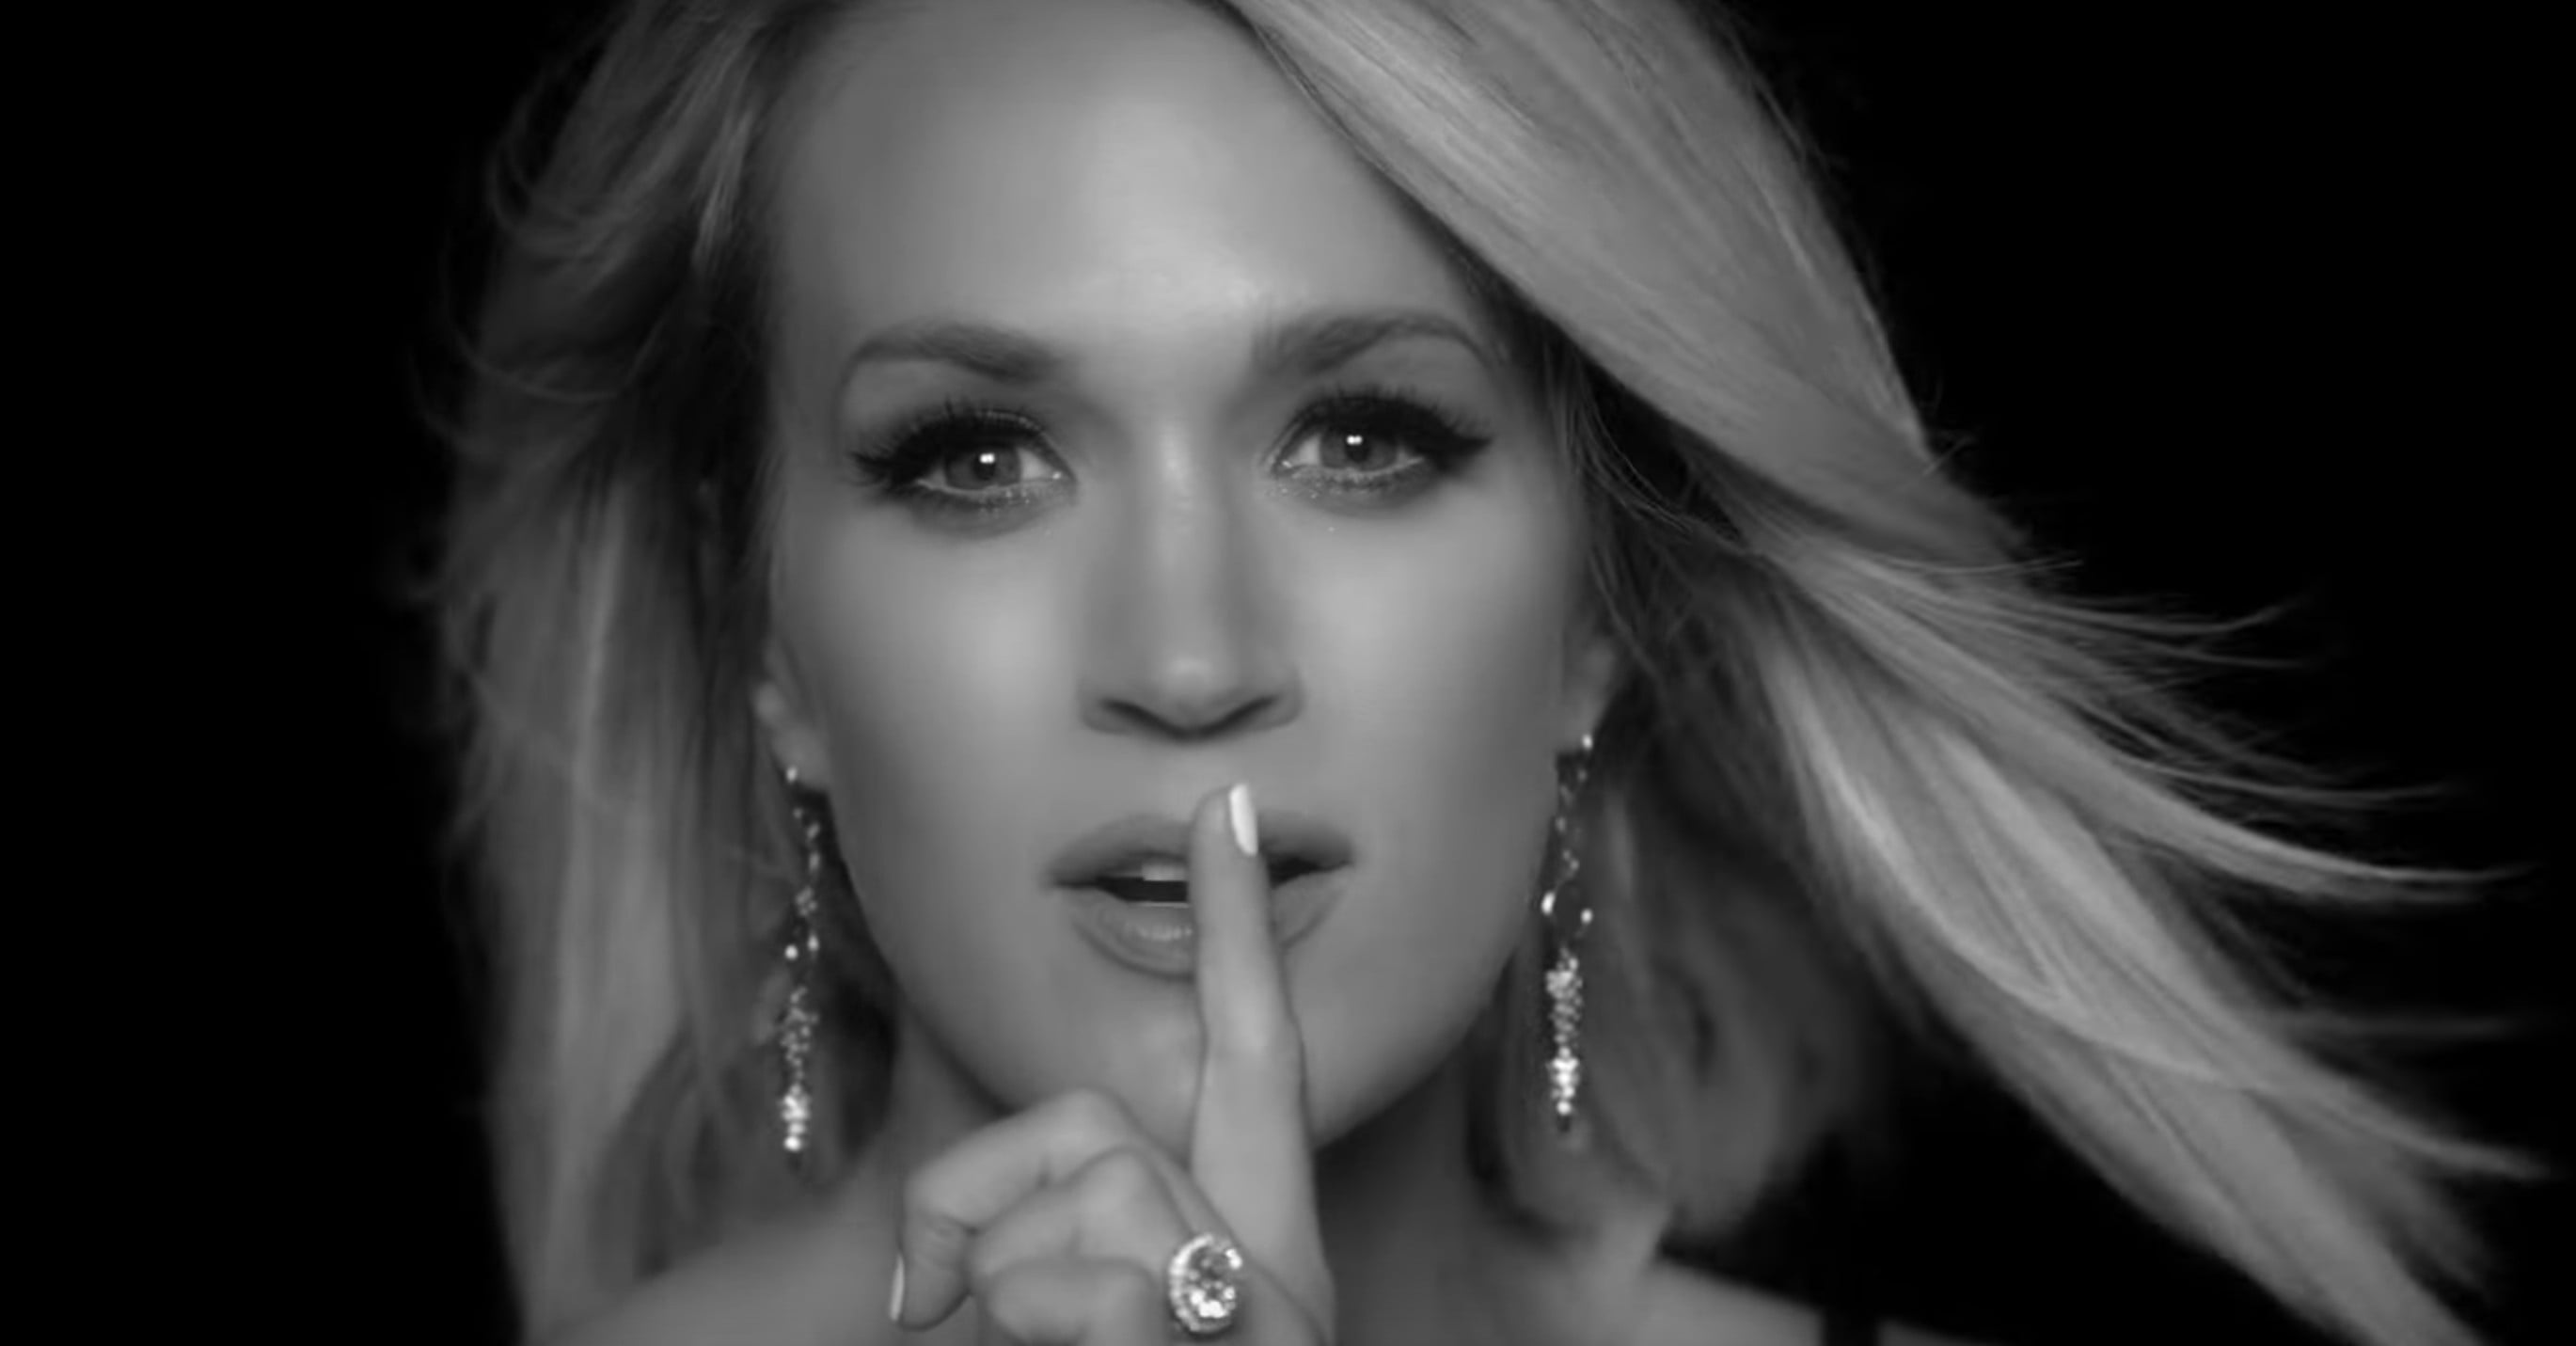 Carrie Underwood jaw-dropping appearance may be her most impressive look  yet